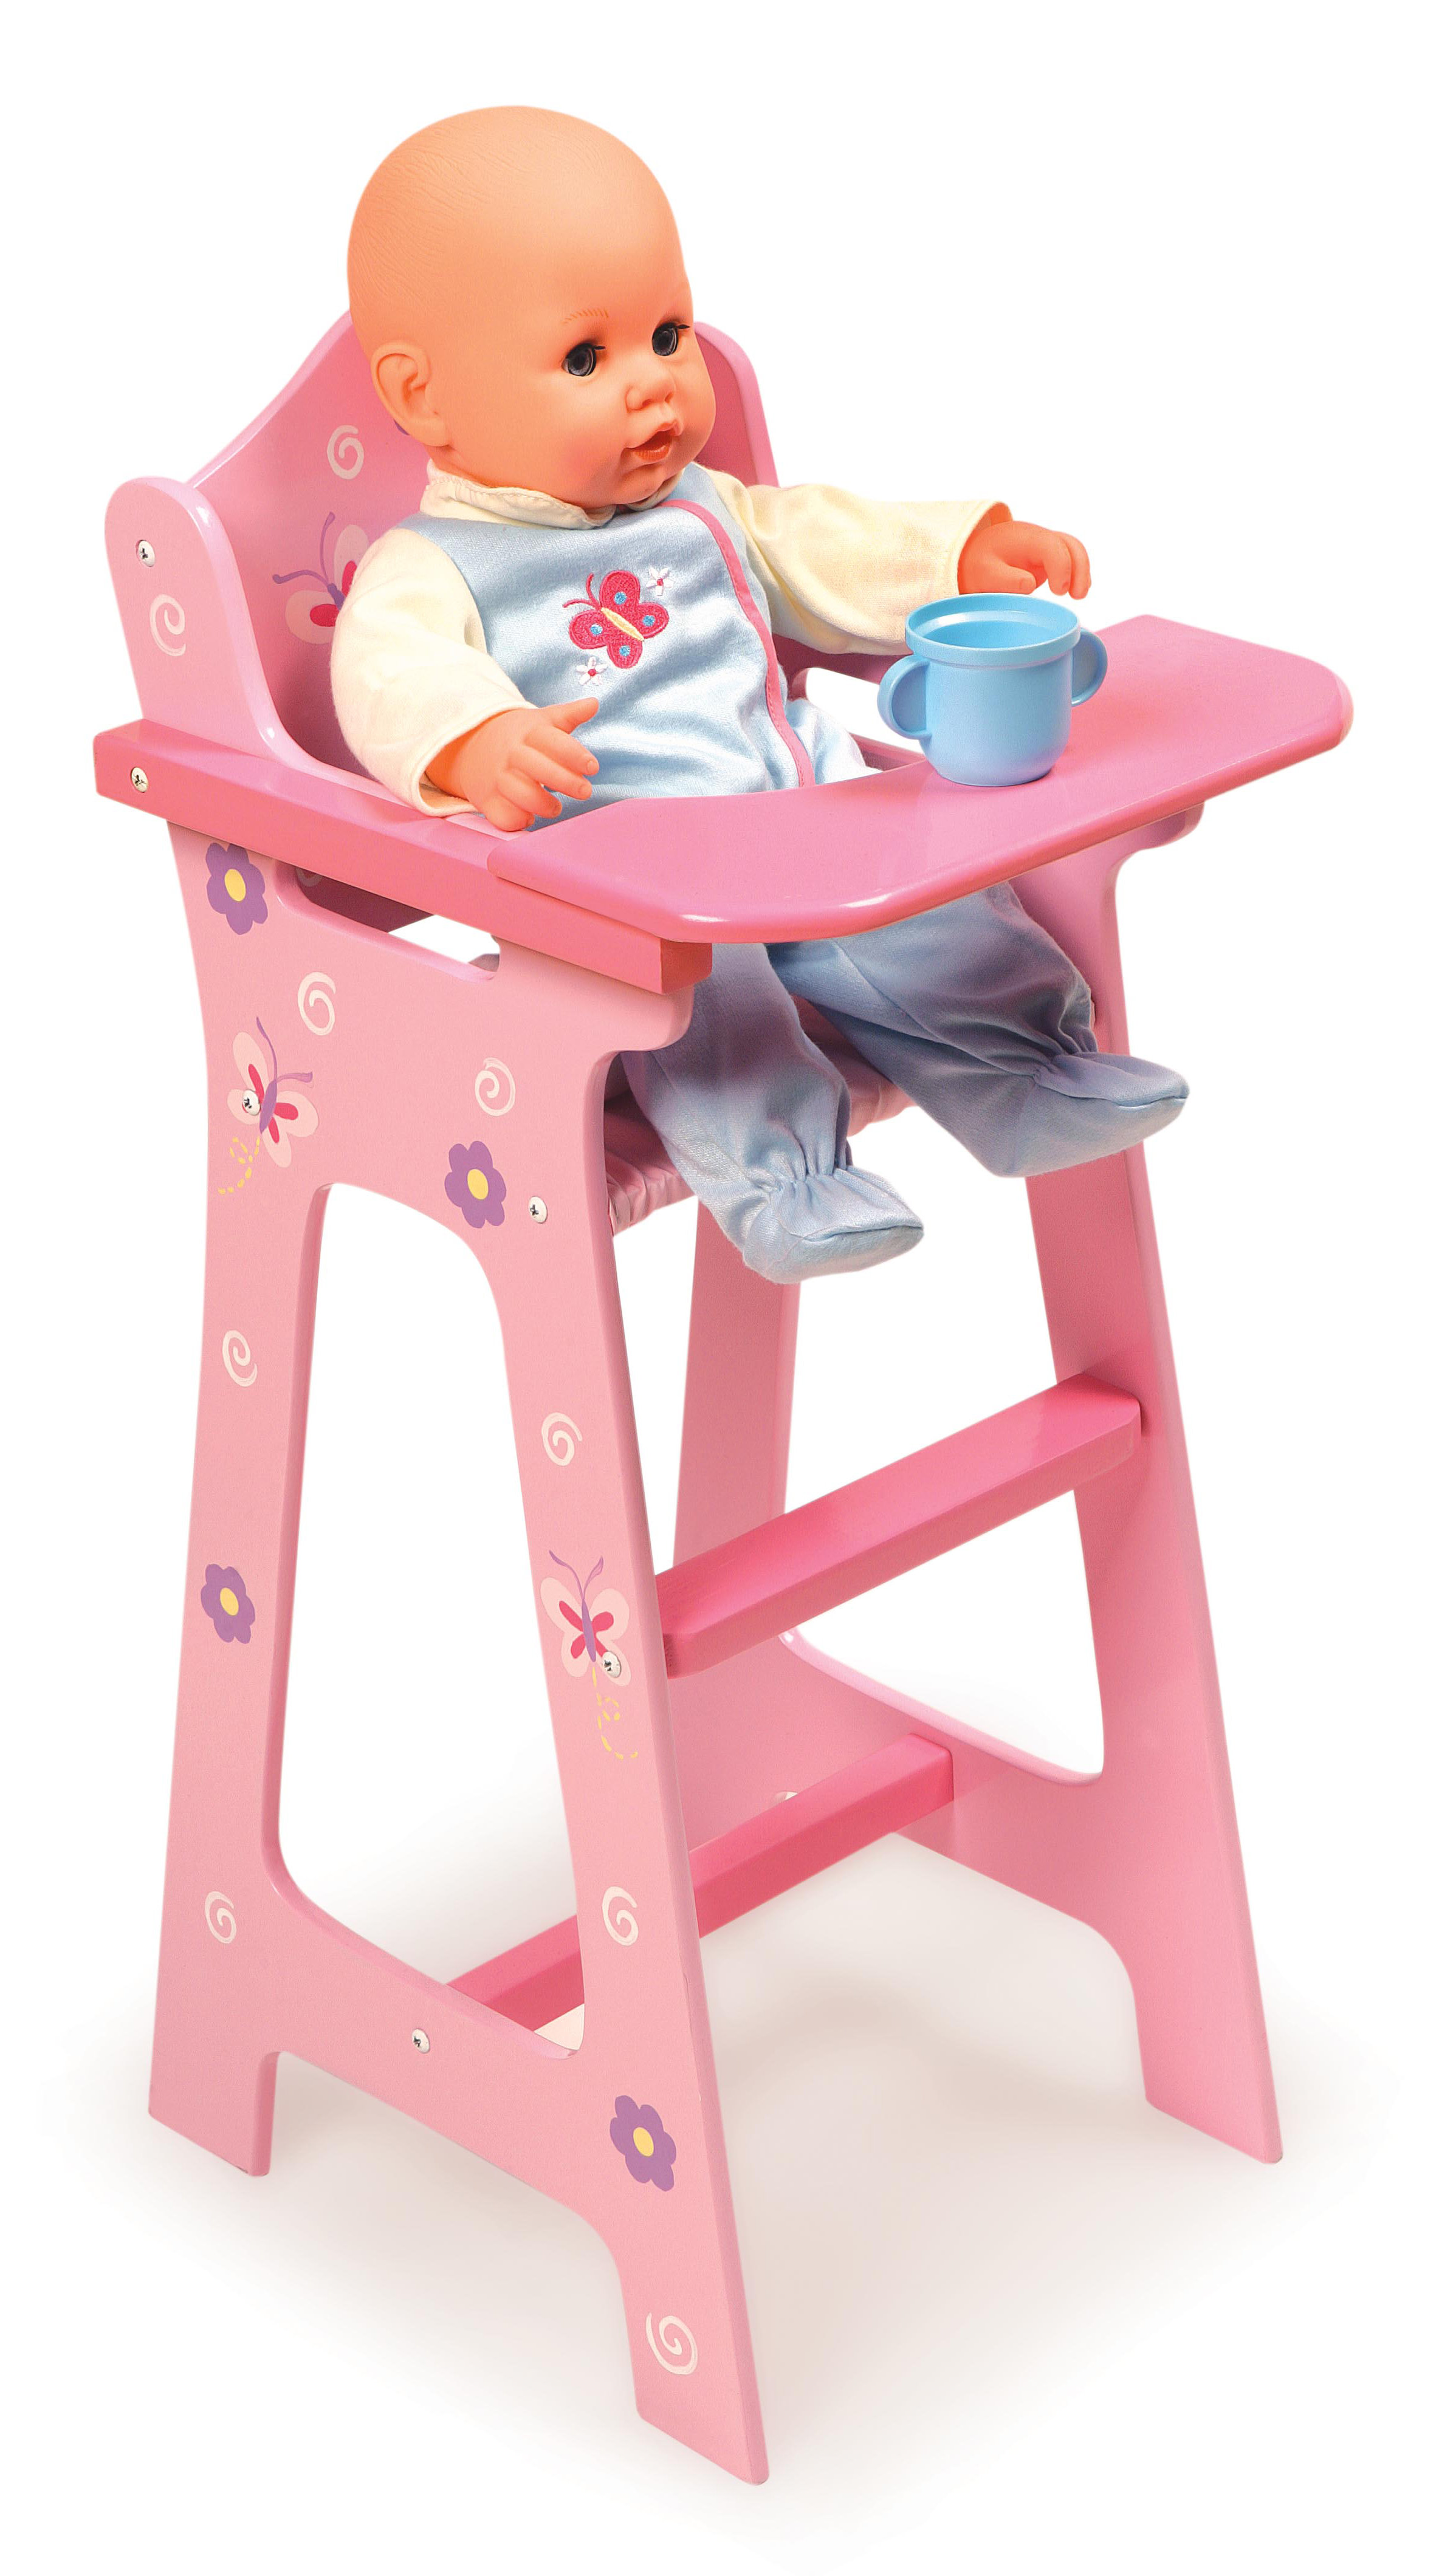 Olivia's Little World Wooden Baby Doll 6-in-1 Changing Station